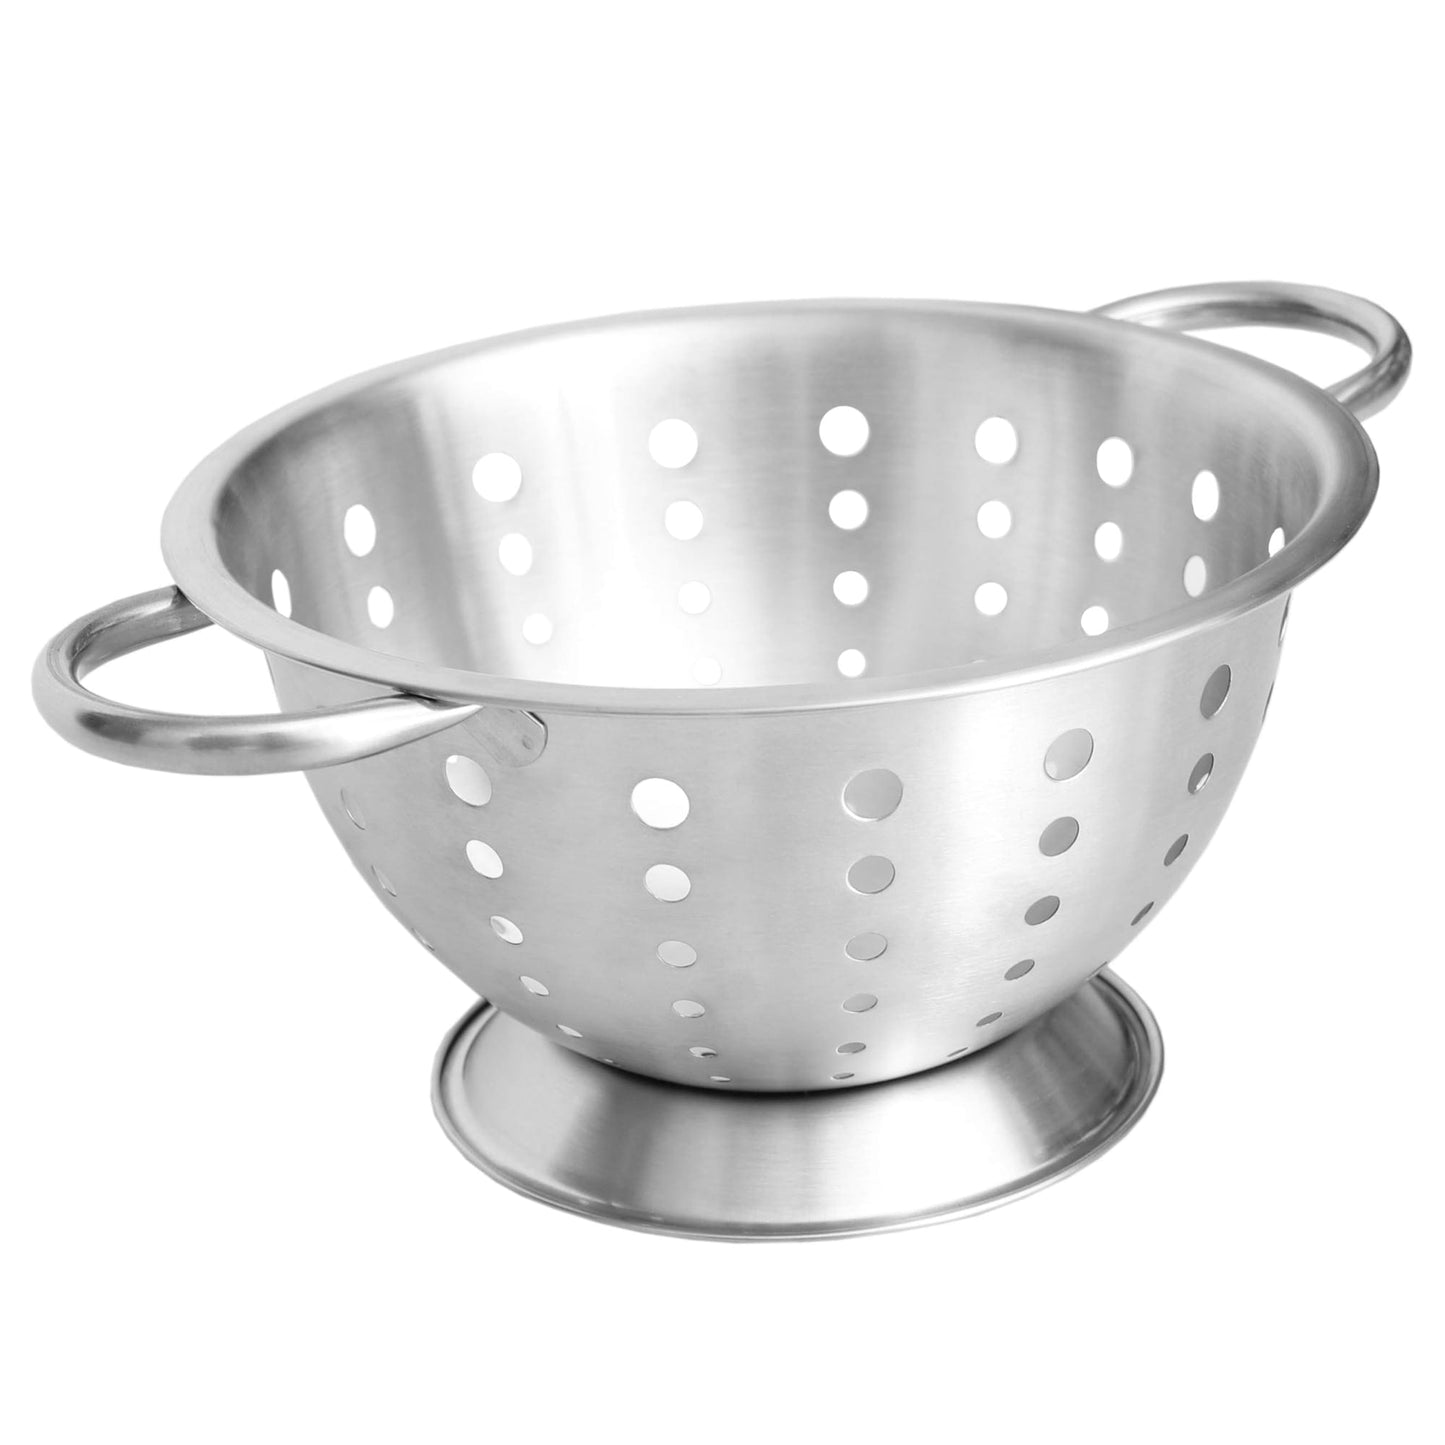 5 Qt Deep Stainless Steel Colander with Easy Grip Handles, Silver